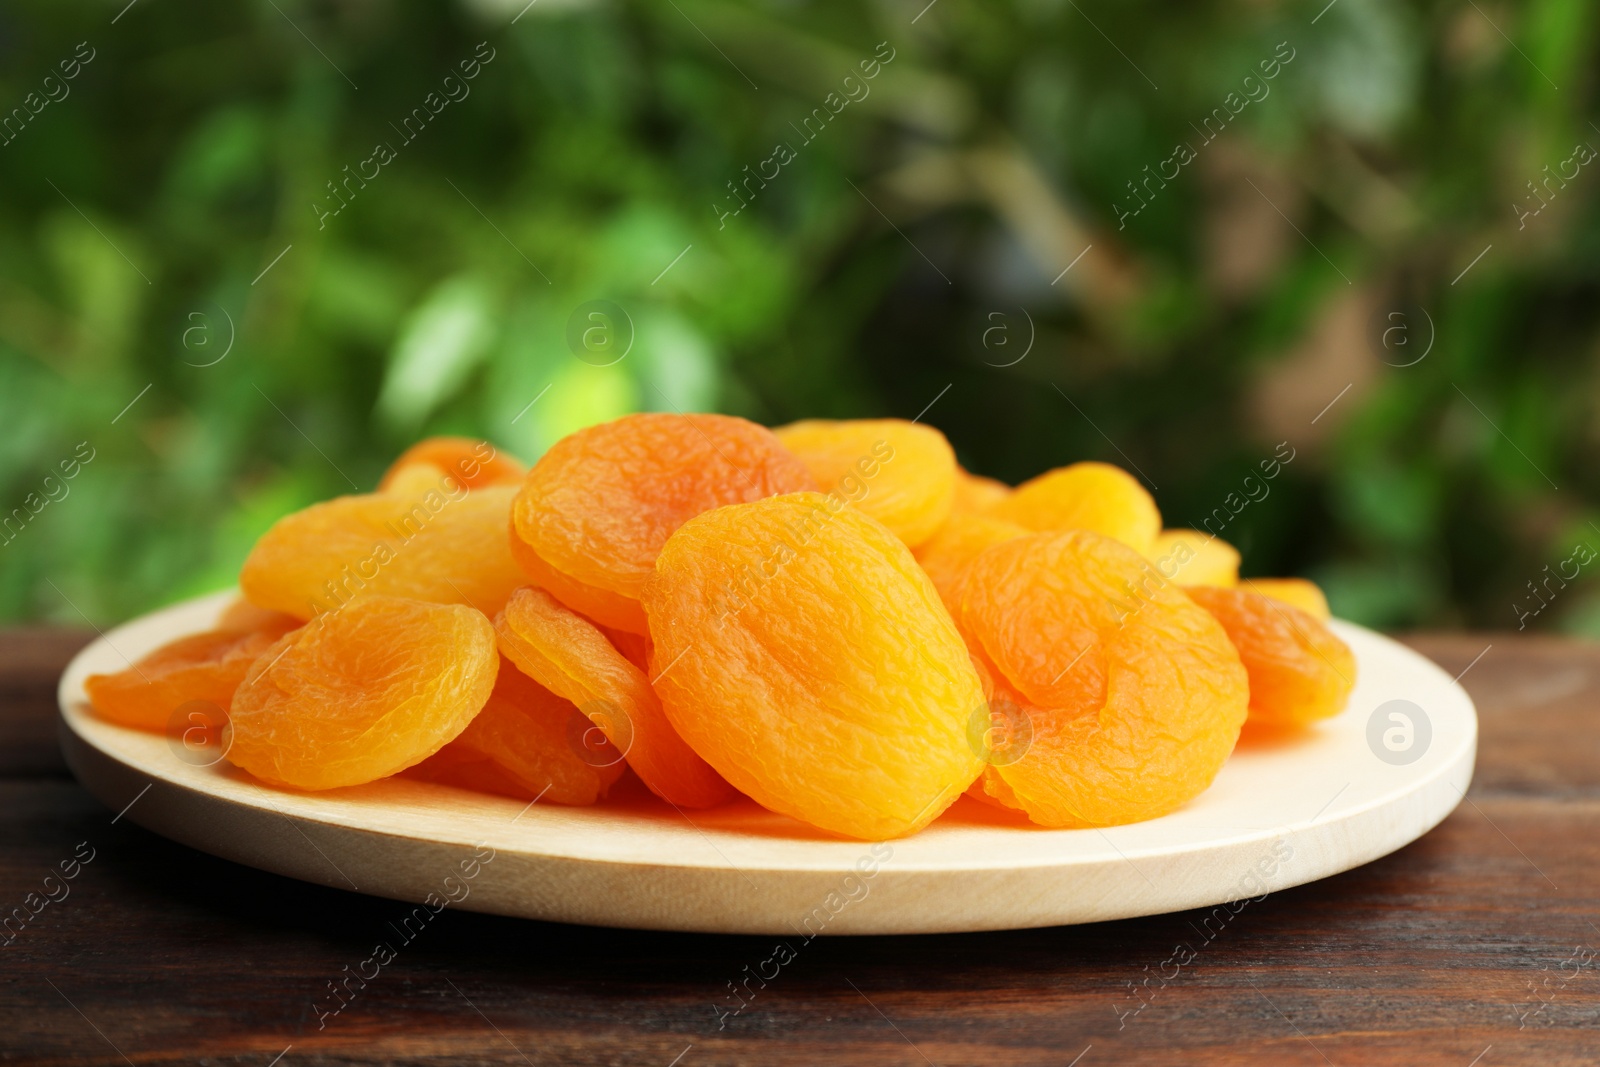 Photo of Plate of tasty apricots on wooden table against blurred green background. Dried fruits